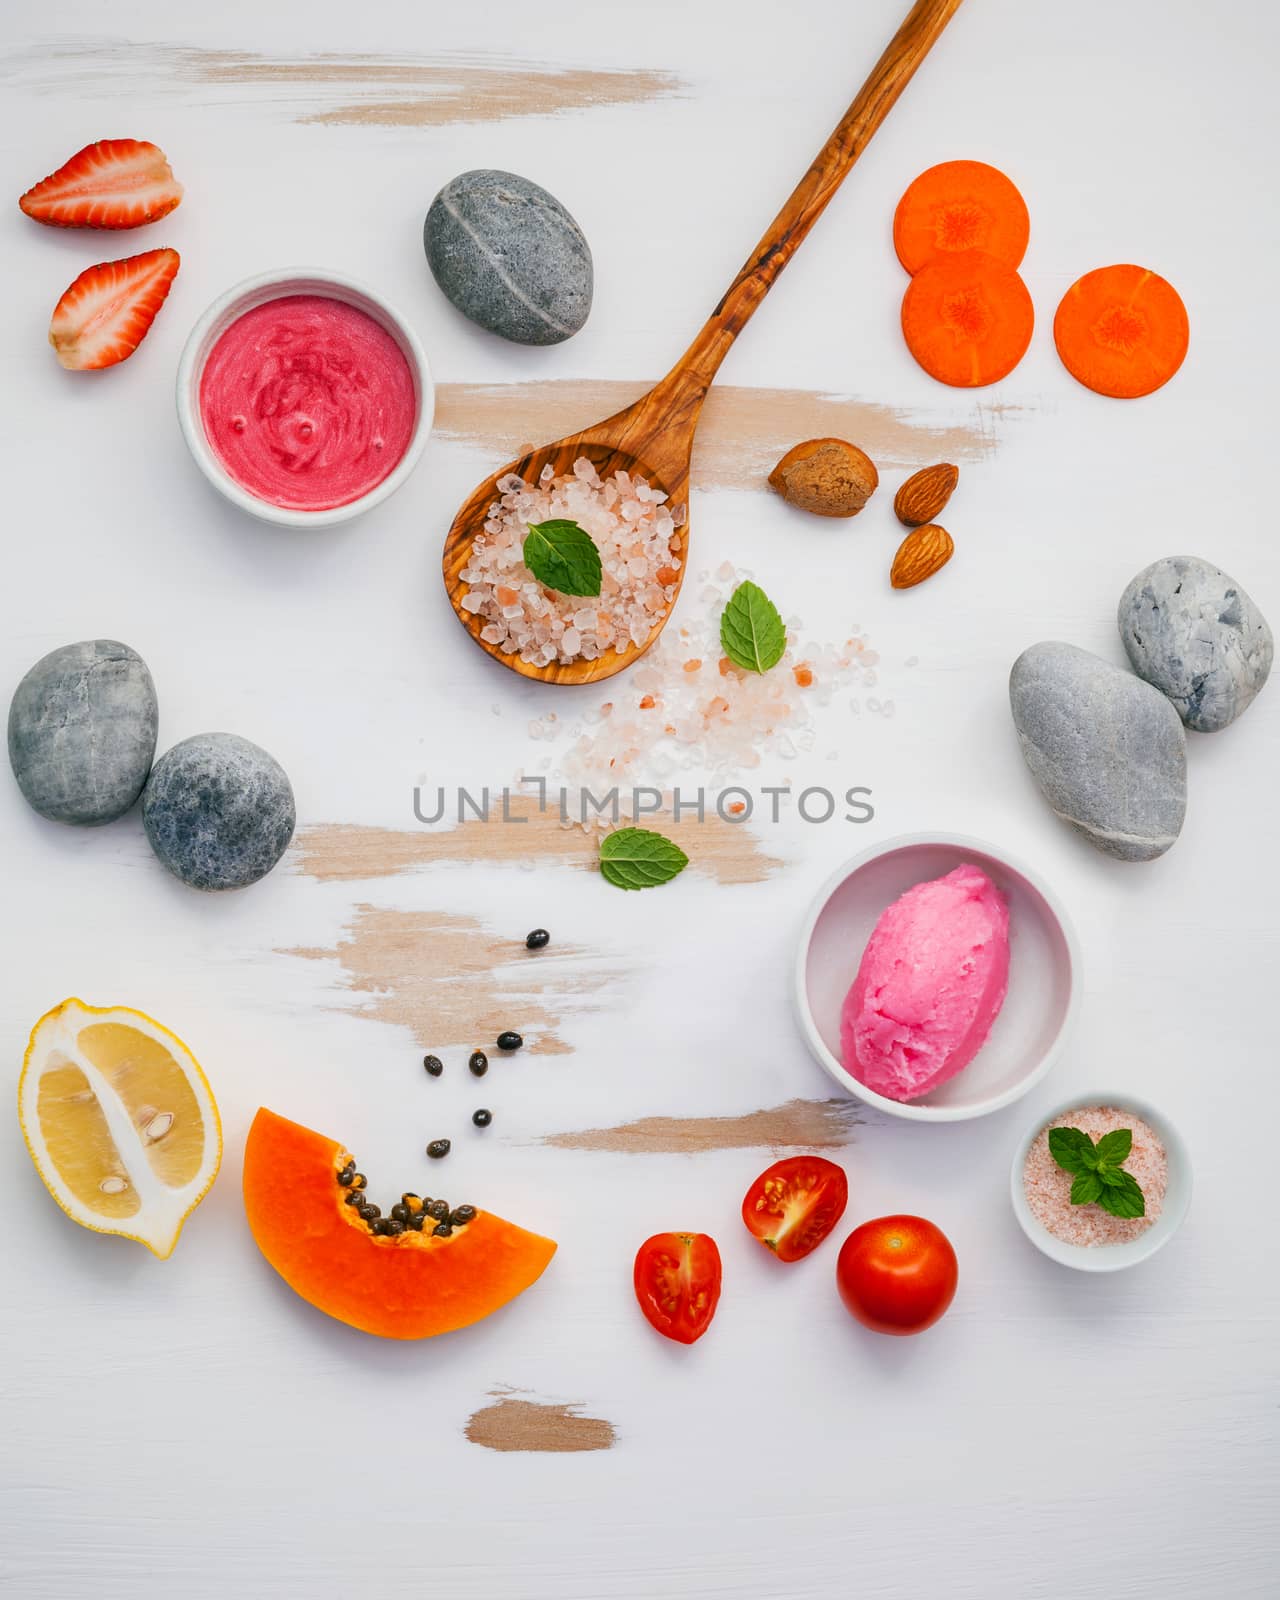 Homemade skin care and body scrubs with red natural ingredients strawberry , tomato ,himalayan salt,papaya, carrot and  stone on white wooden background with flat lay. Zen spa and oriental spa theme.